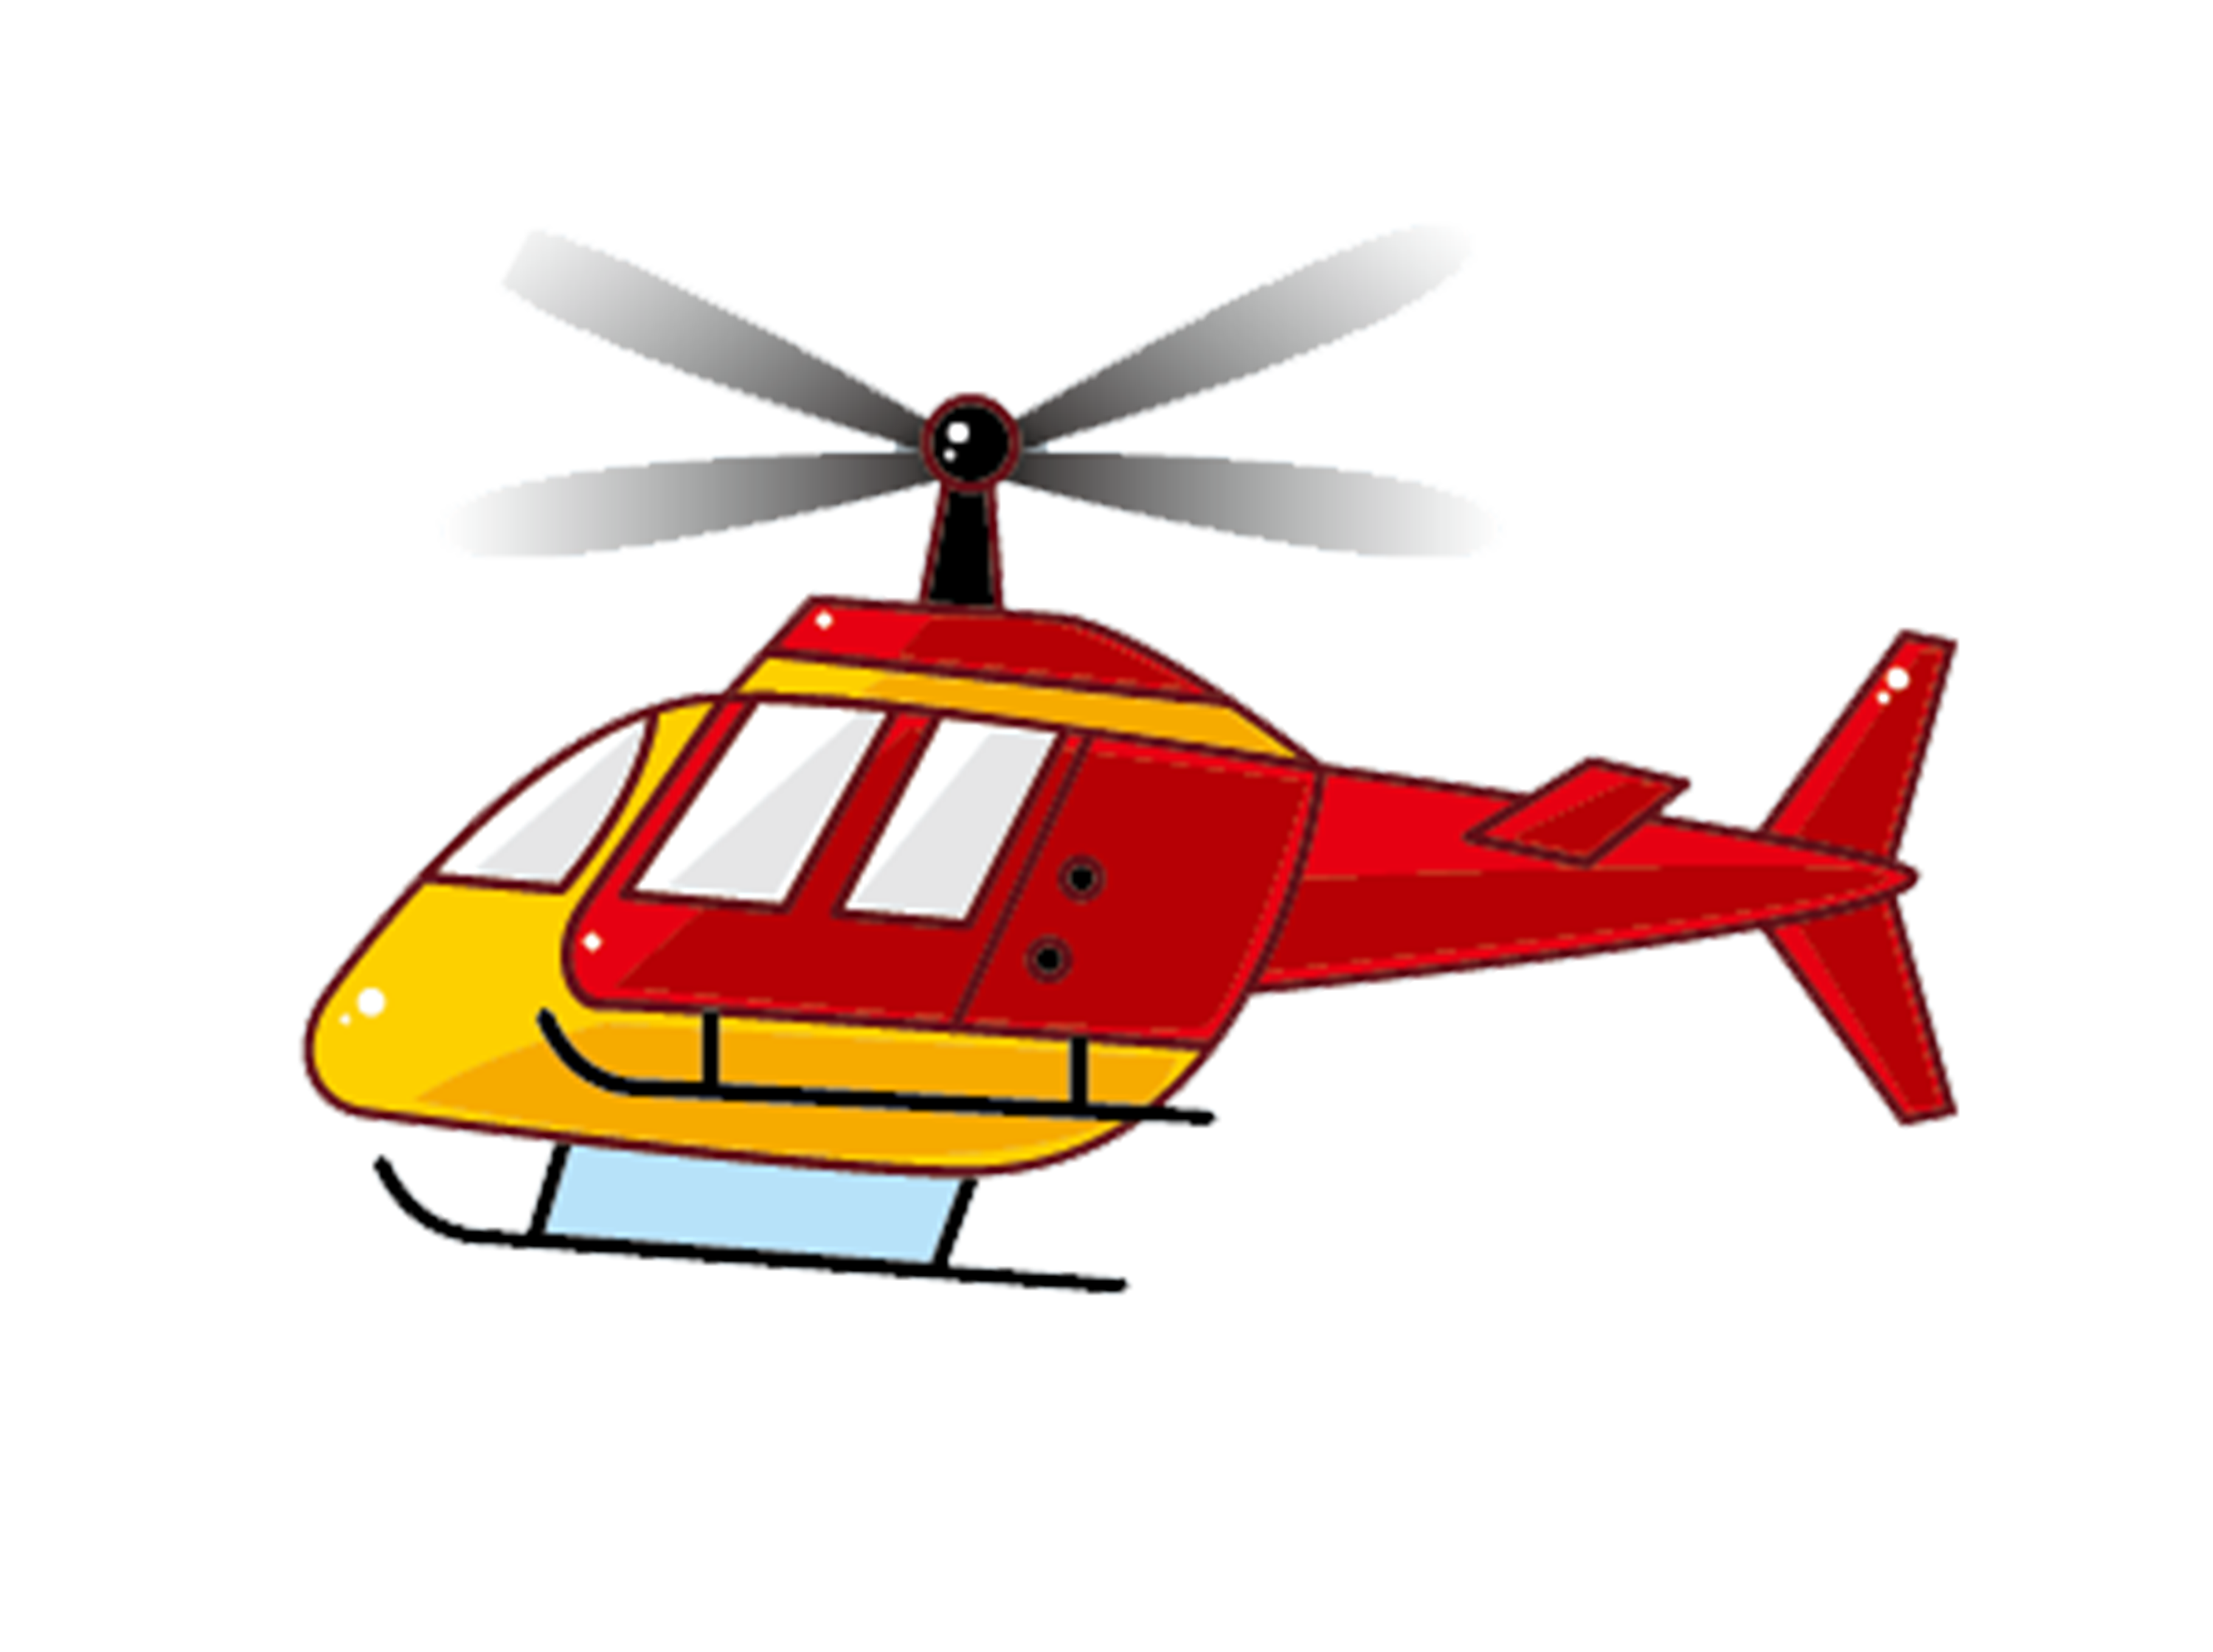 transportation clipart helicopter